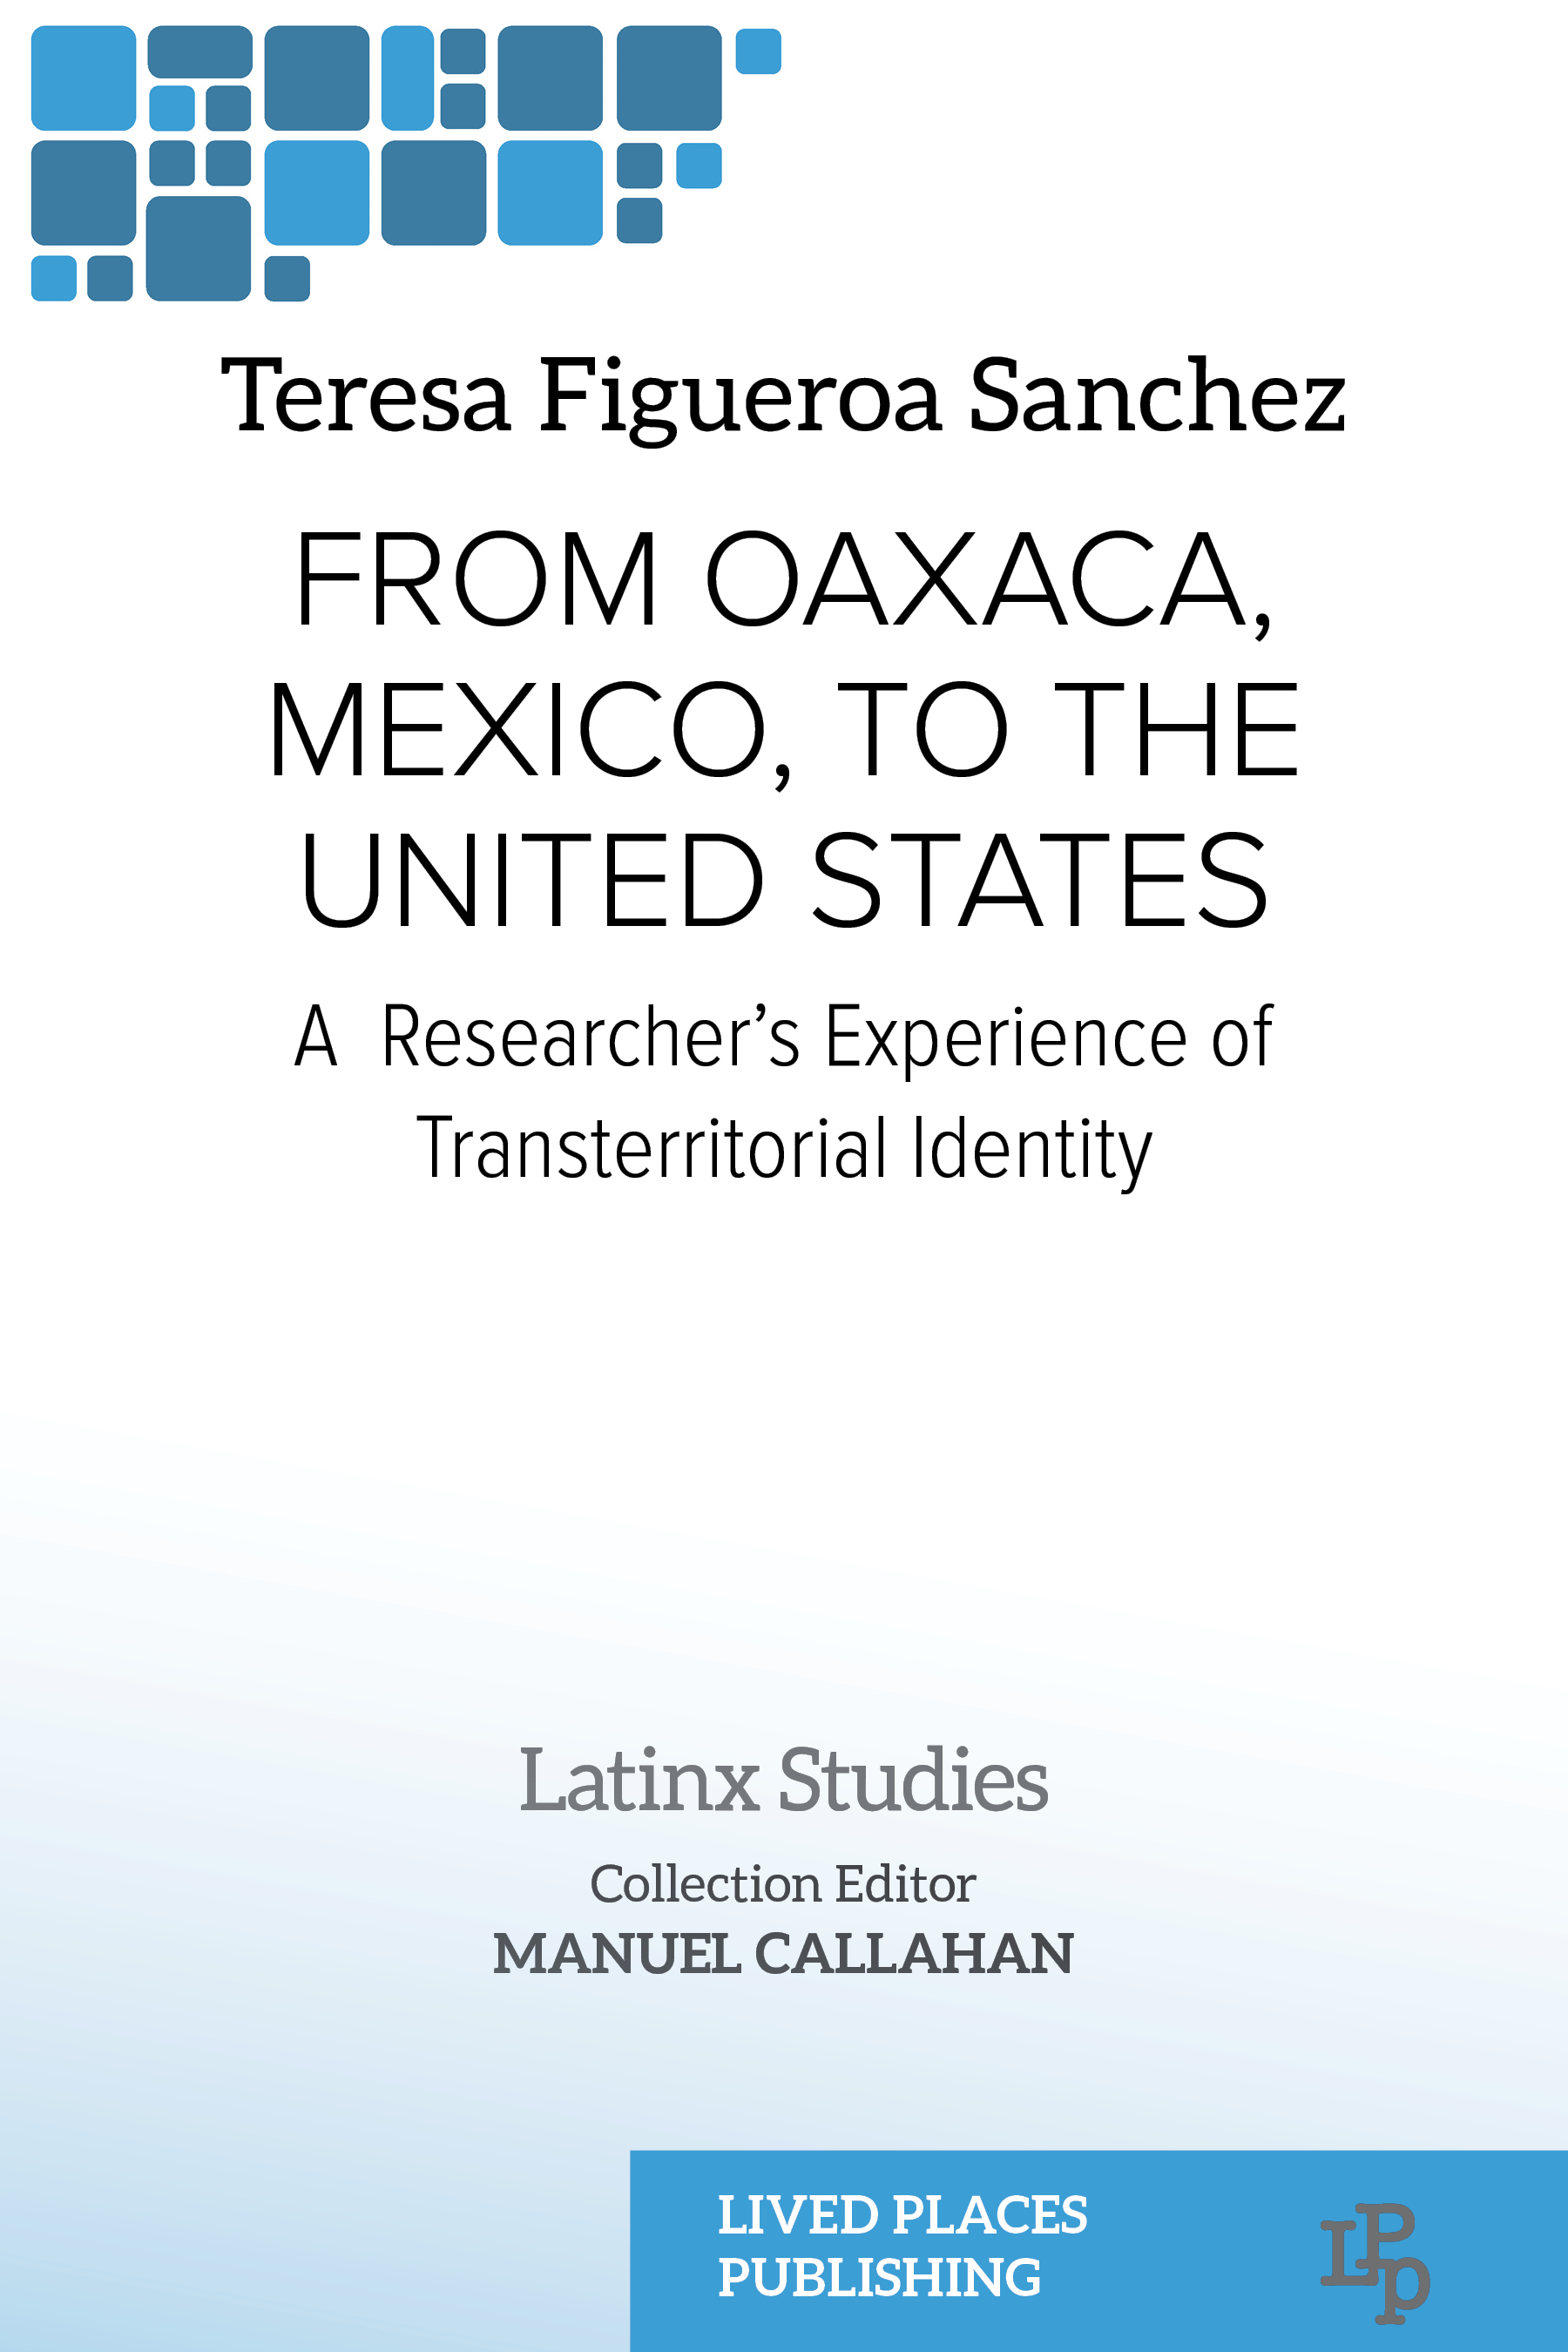 From Oaxaca, Mexico, to the United States